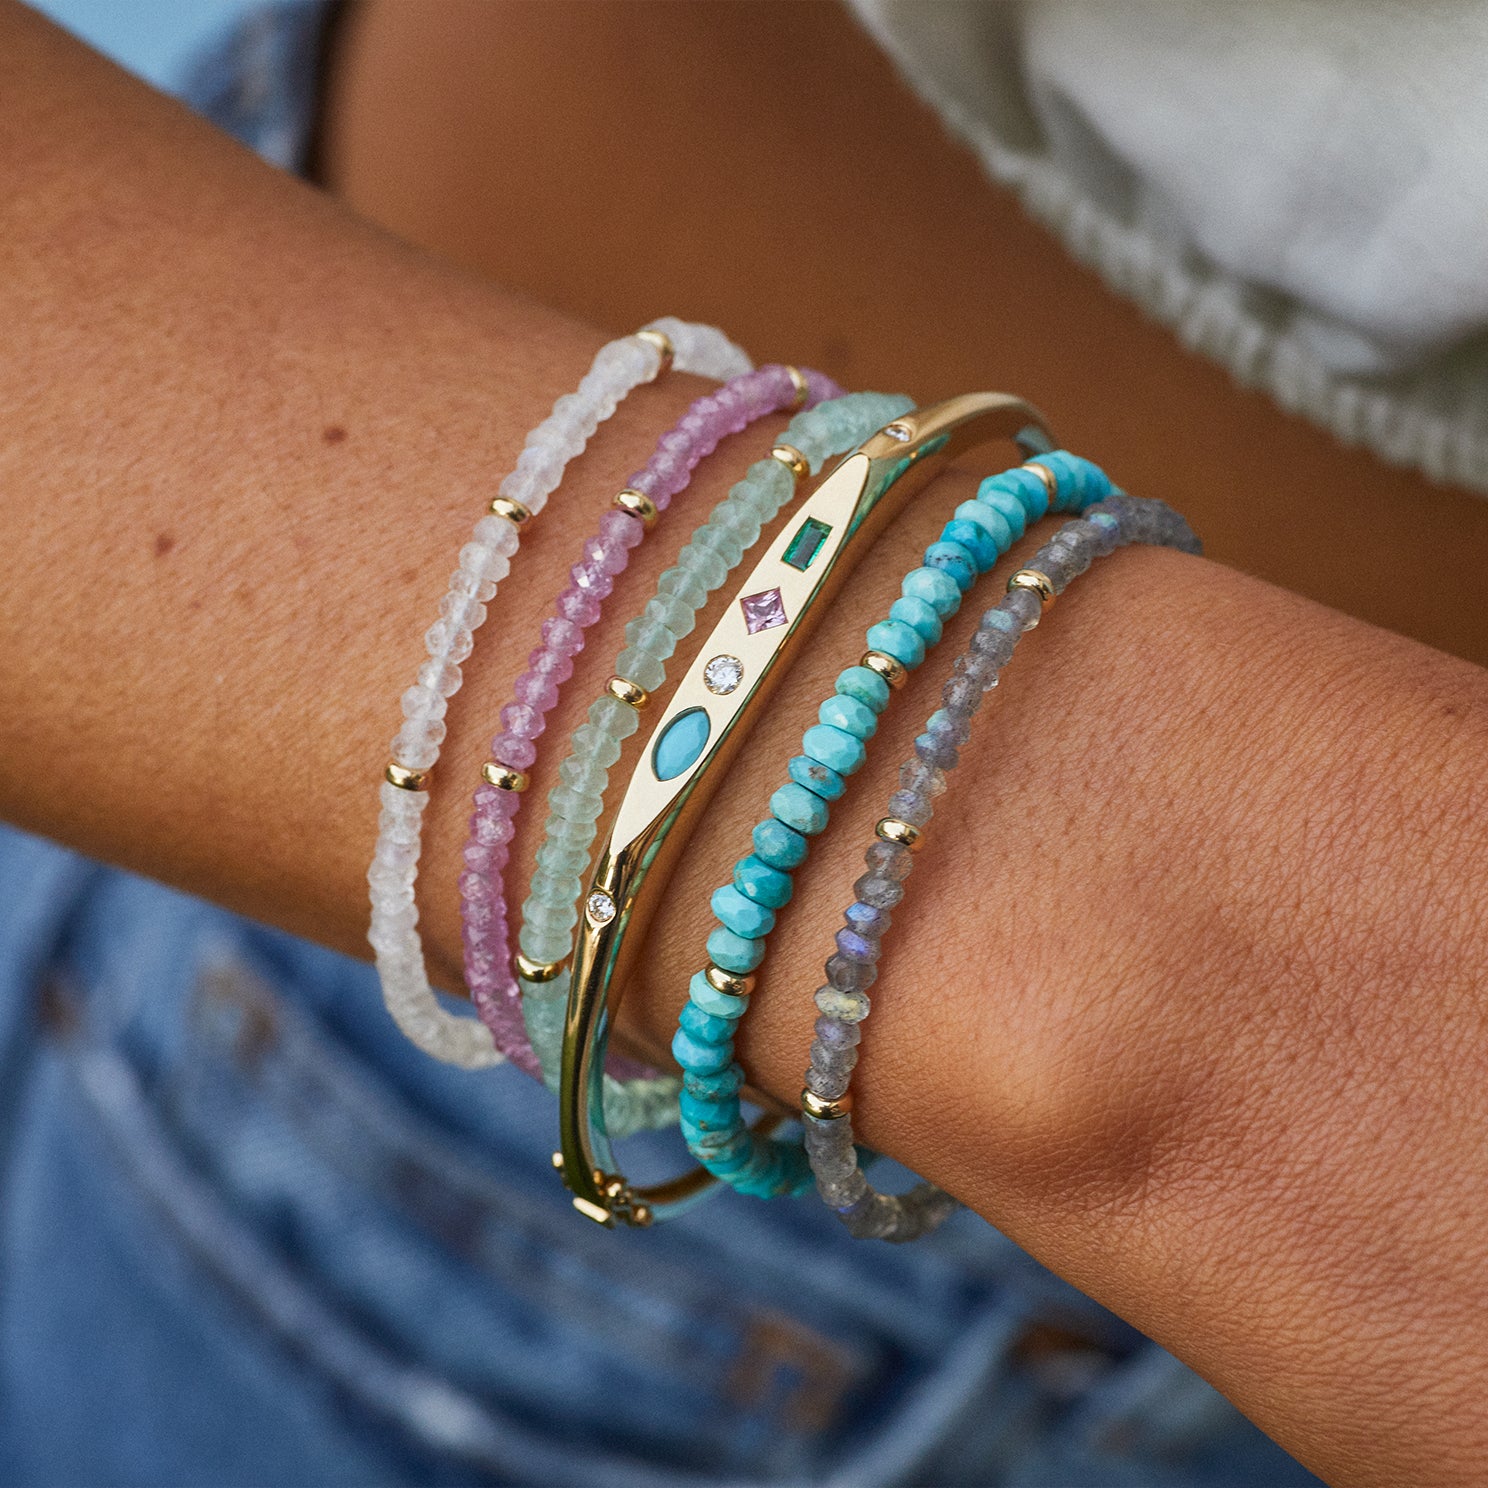 Birthstone Bead Bracelet In Chalcedony styled on wrist of model with four additional beaded bracelets and gold treasure bangle bracelet